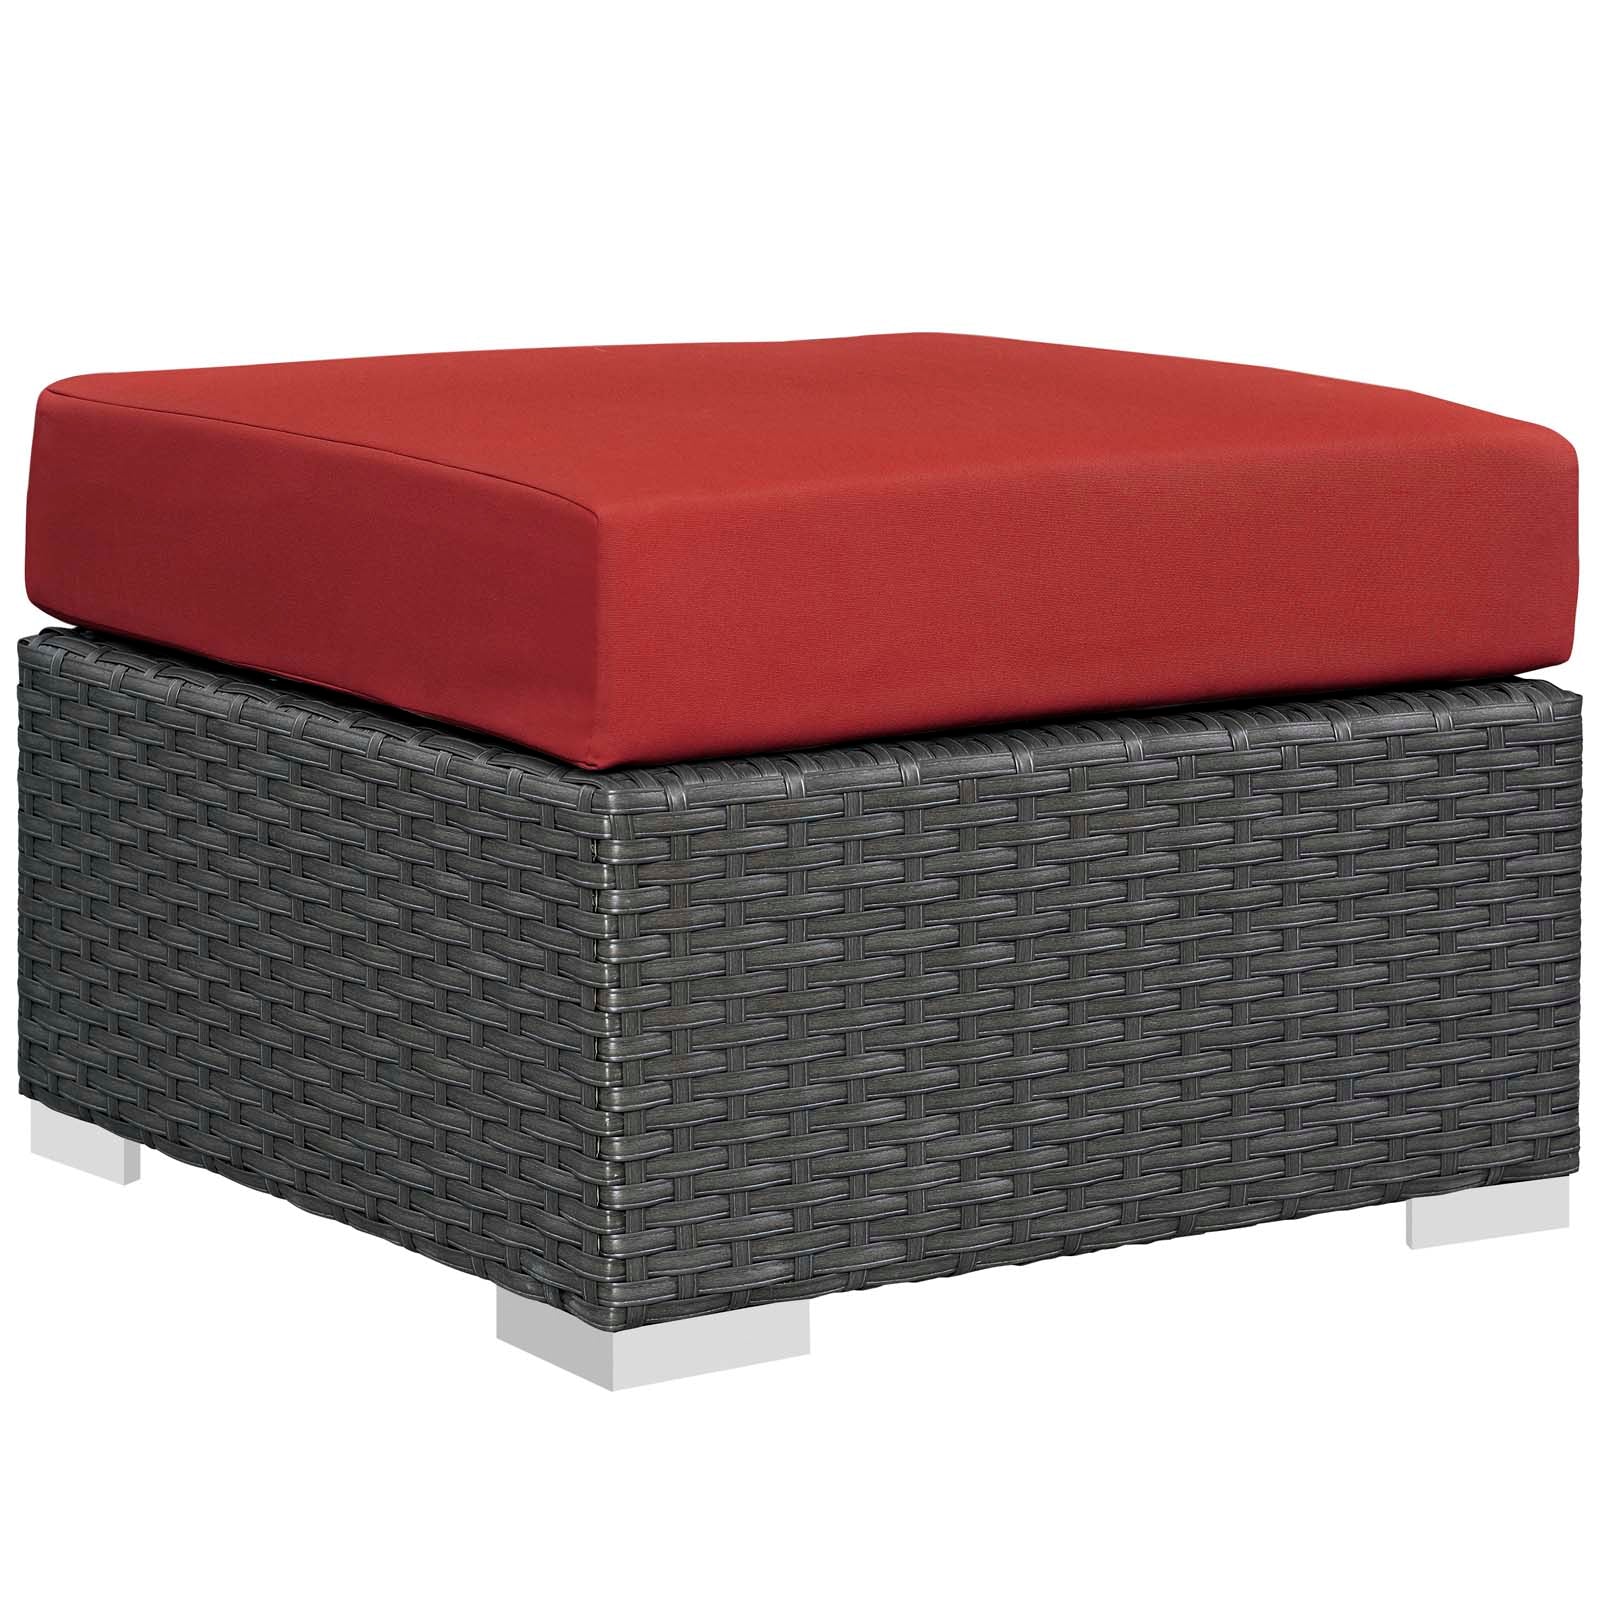 Sojourn 3 Piece Outdoor Patio Sunbrella Sectional Set Red